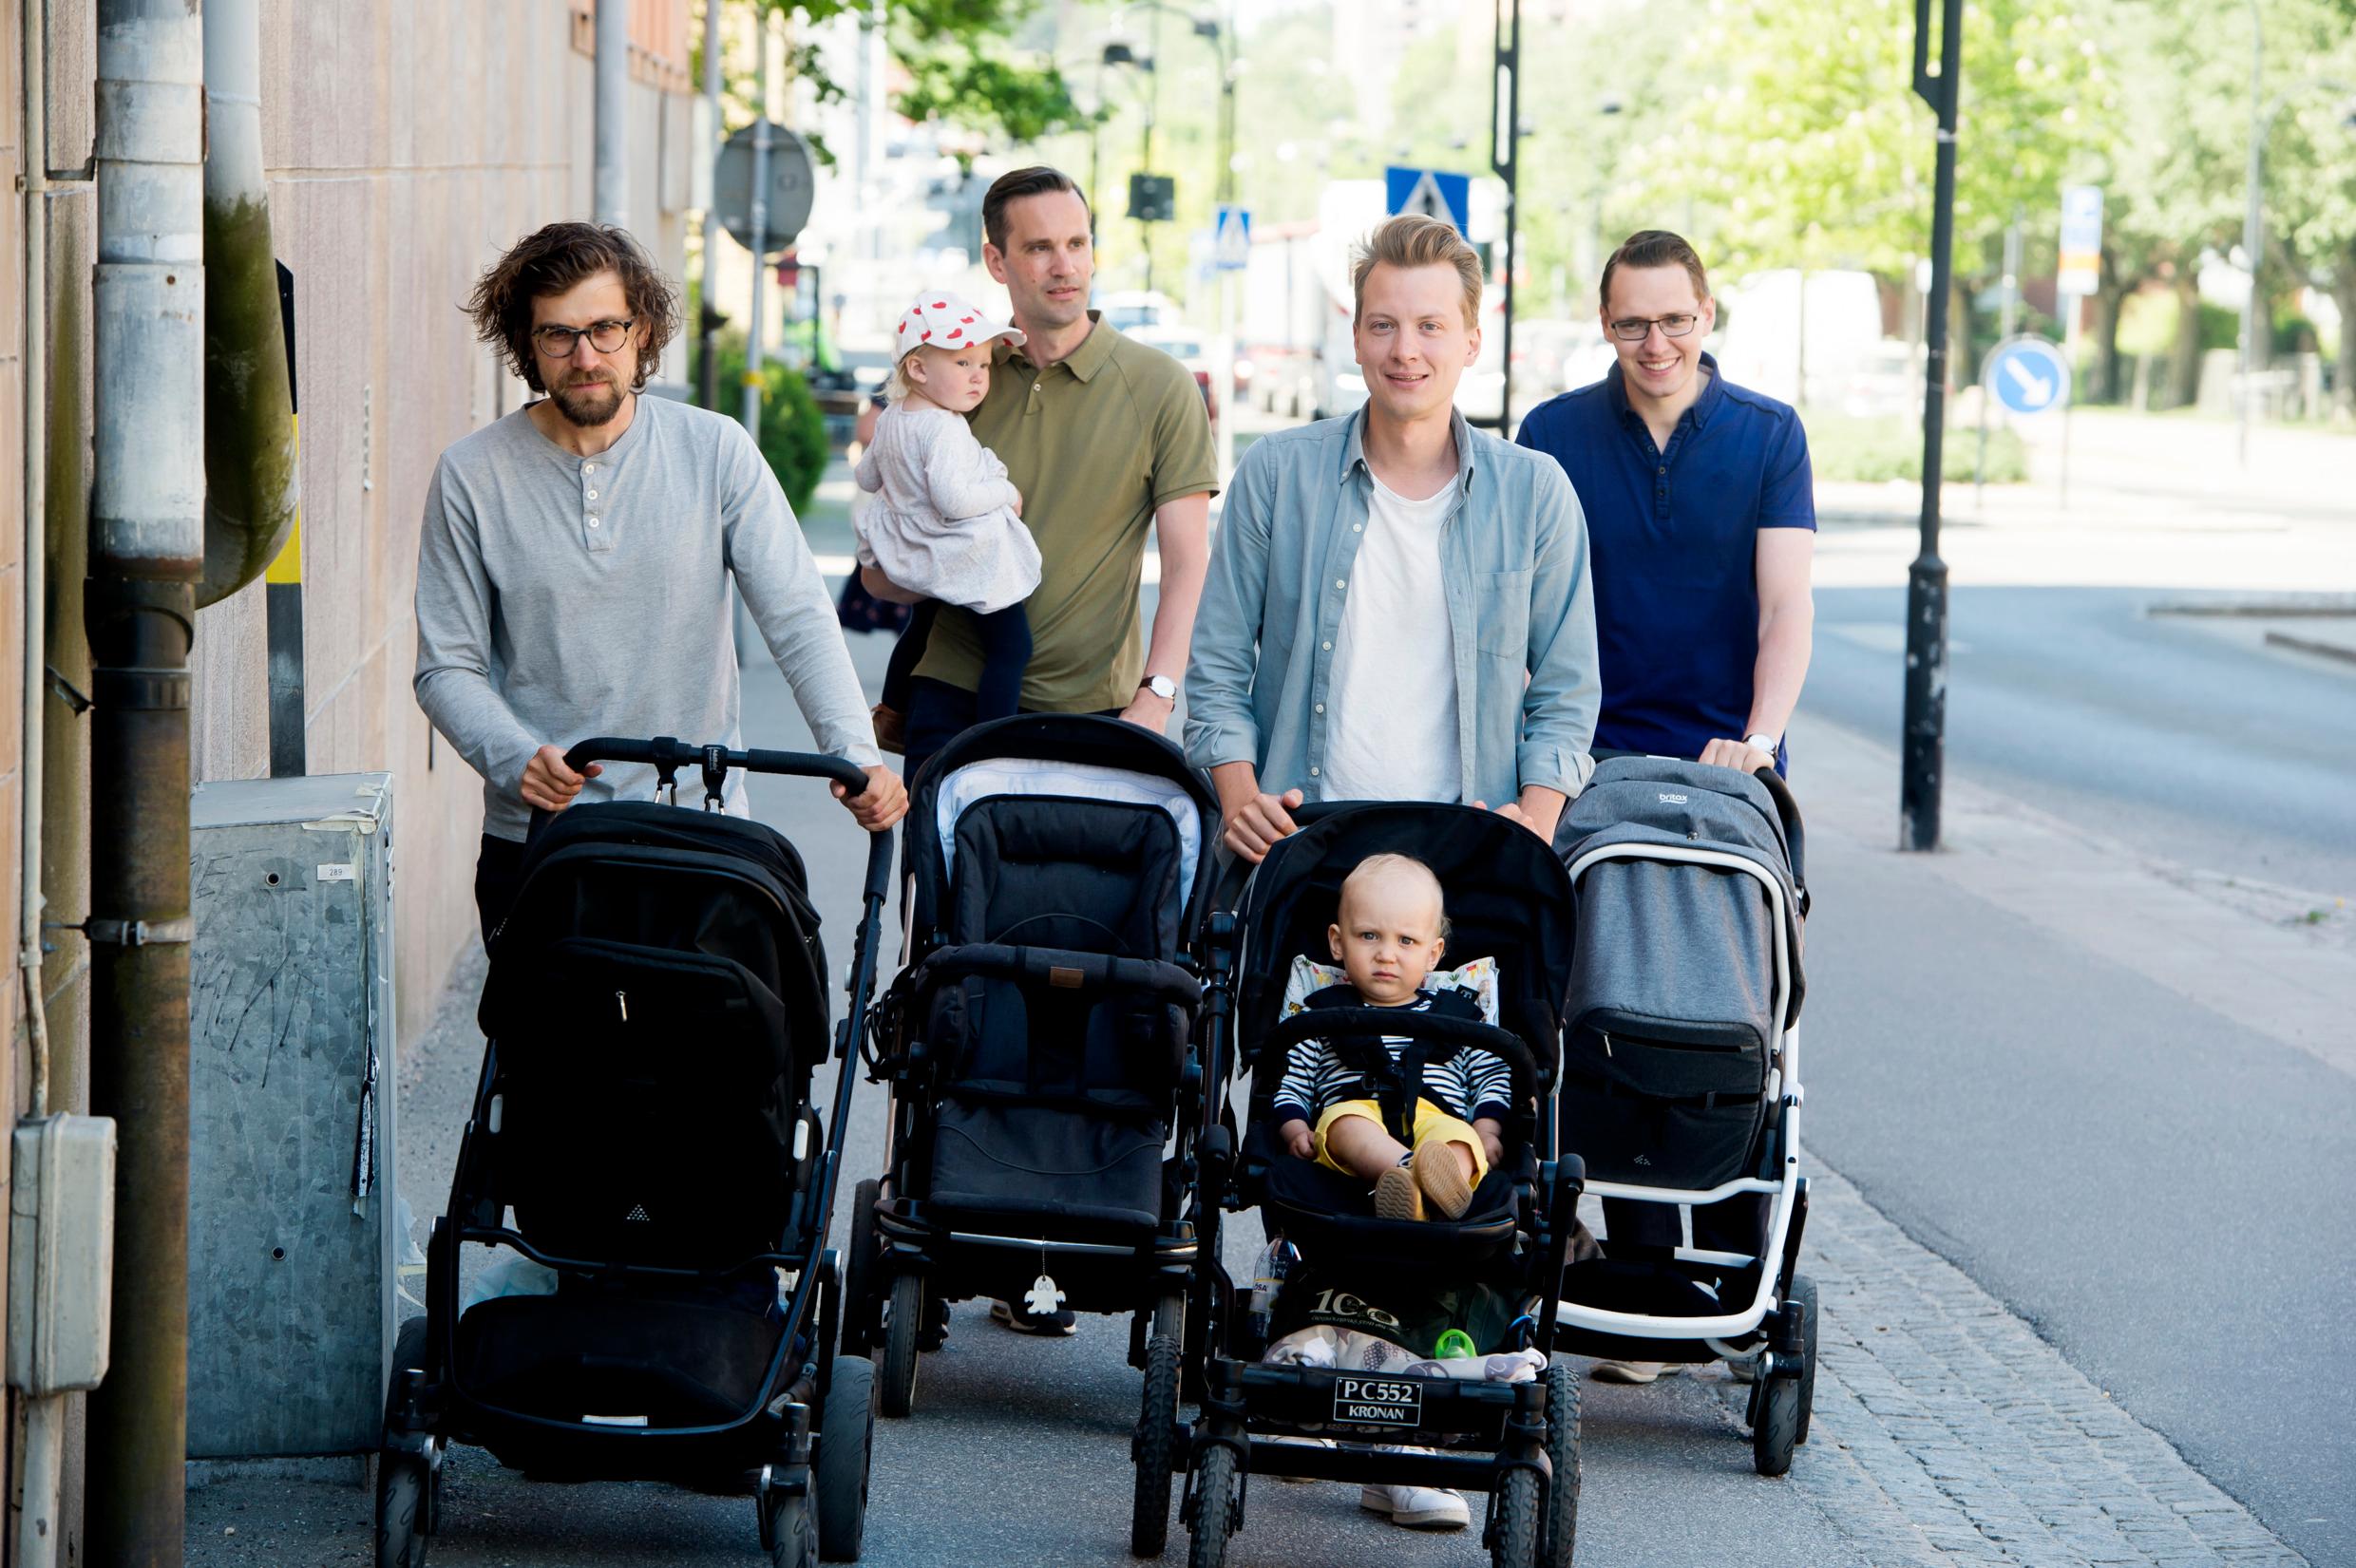 Four men with baby strollers walk down the street. Each man has a baby stroller.